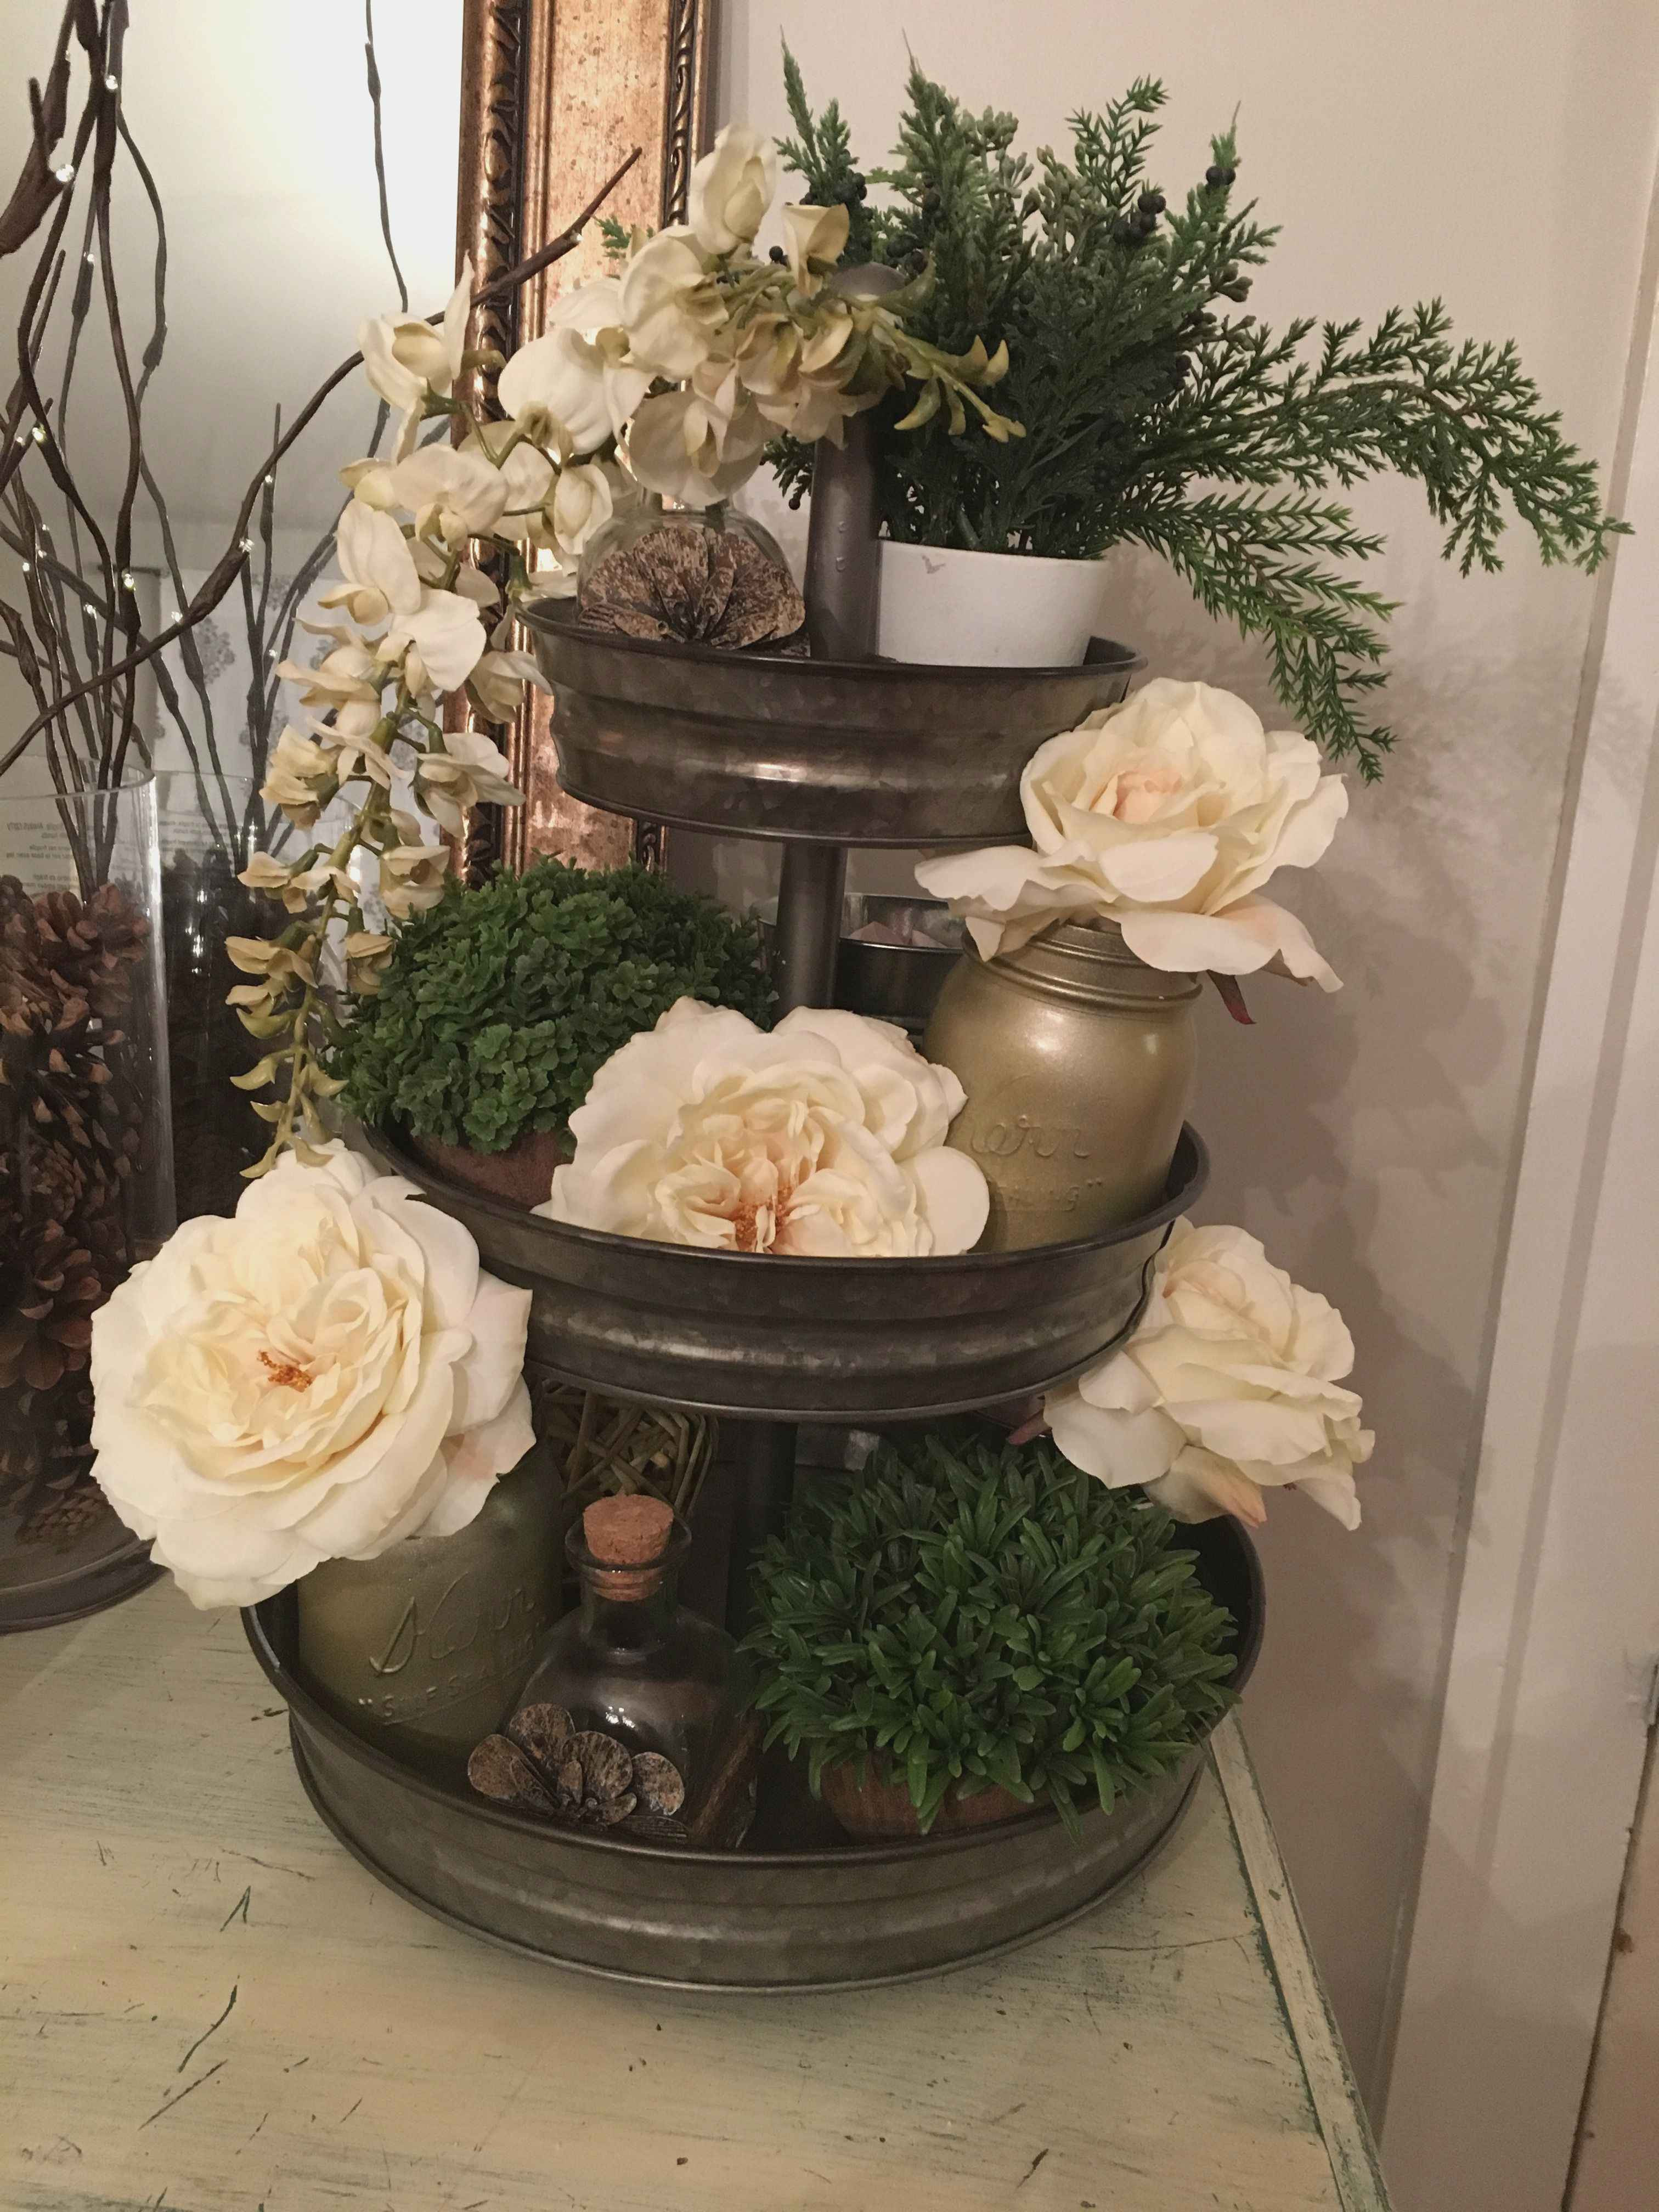 metal vases at hobby lobby of awesome hobby lobby artificial plants plant directory throughout hobby lobby 3 tier galvanized metal trays spray painted mason jars flowers from hobby lobby potted